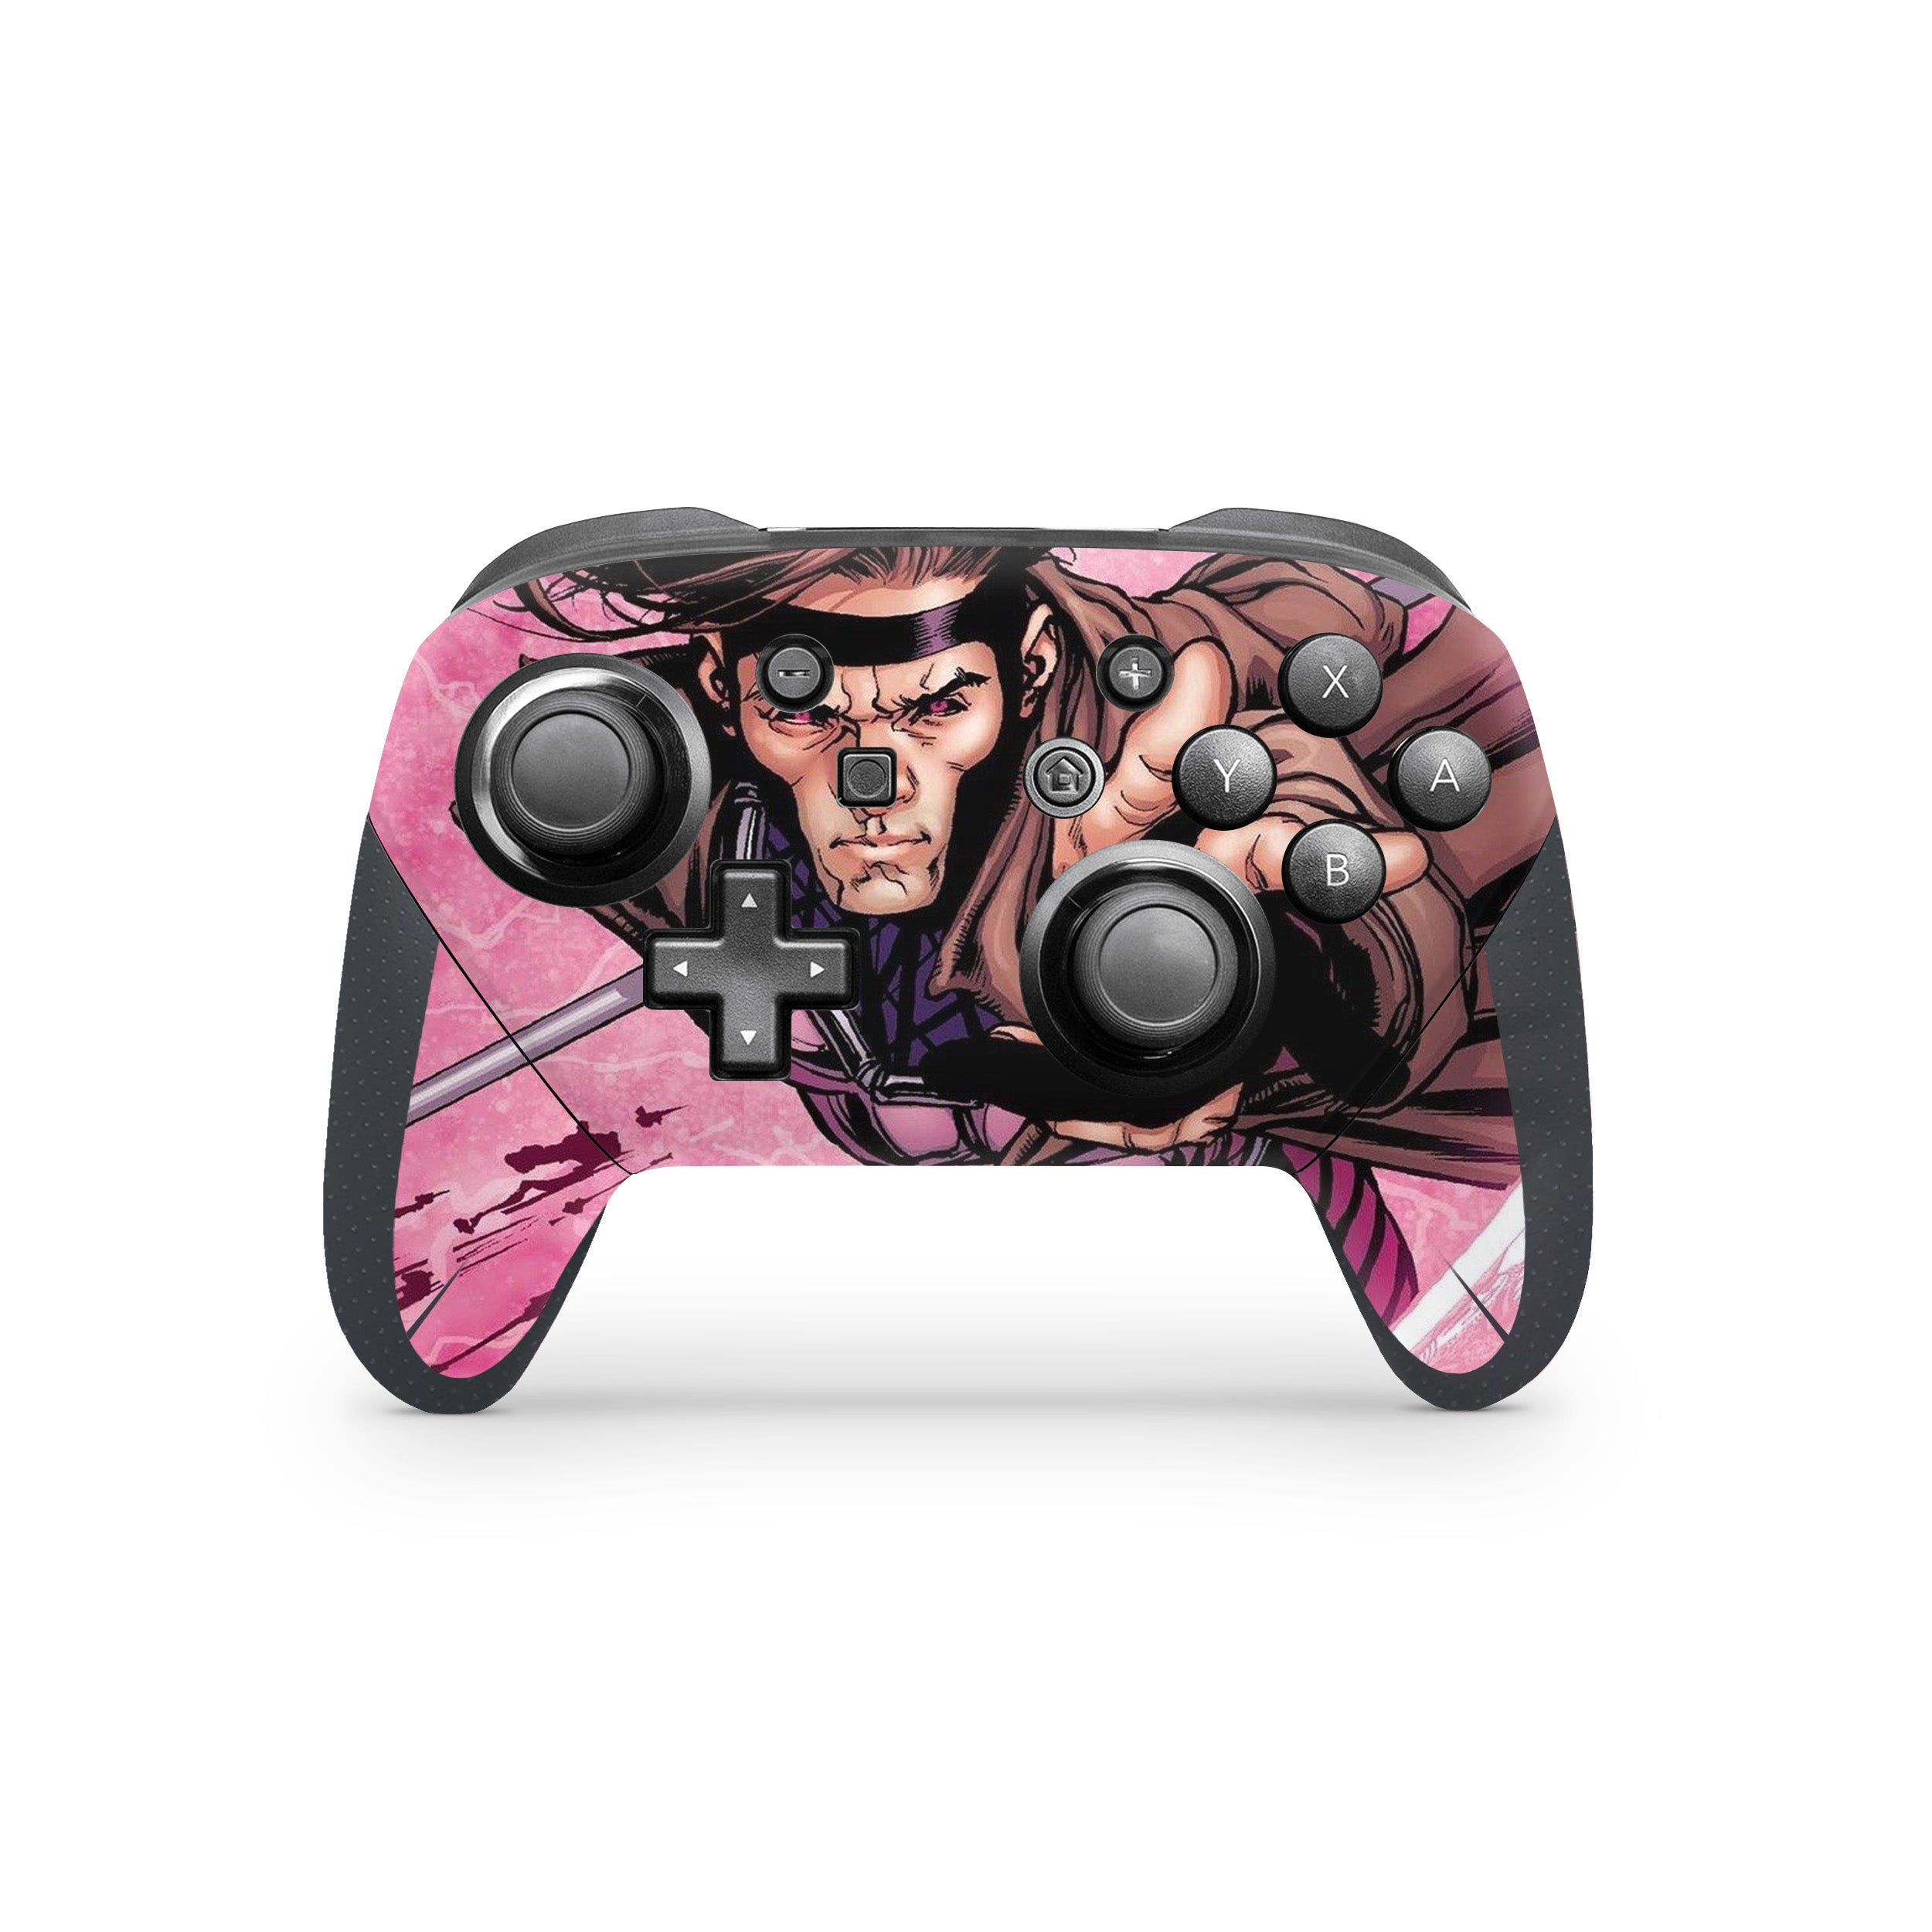 A video game skin featuring a Marvel Comics X Men Gambit design for the Switch Pro Controller.